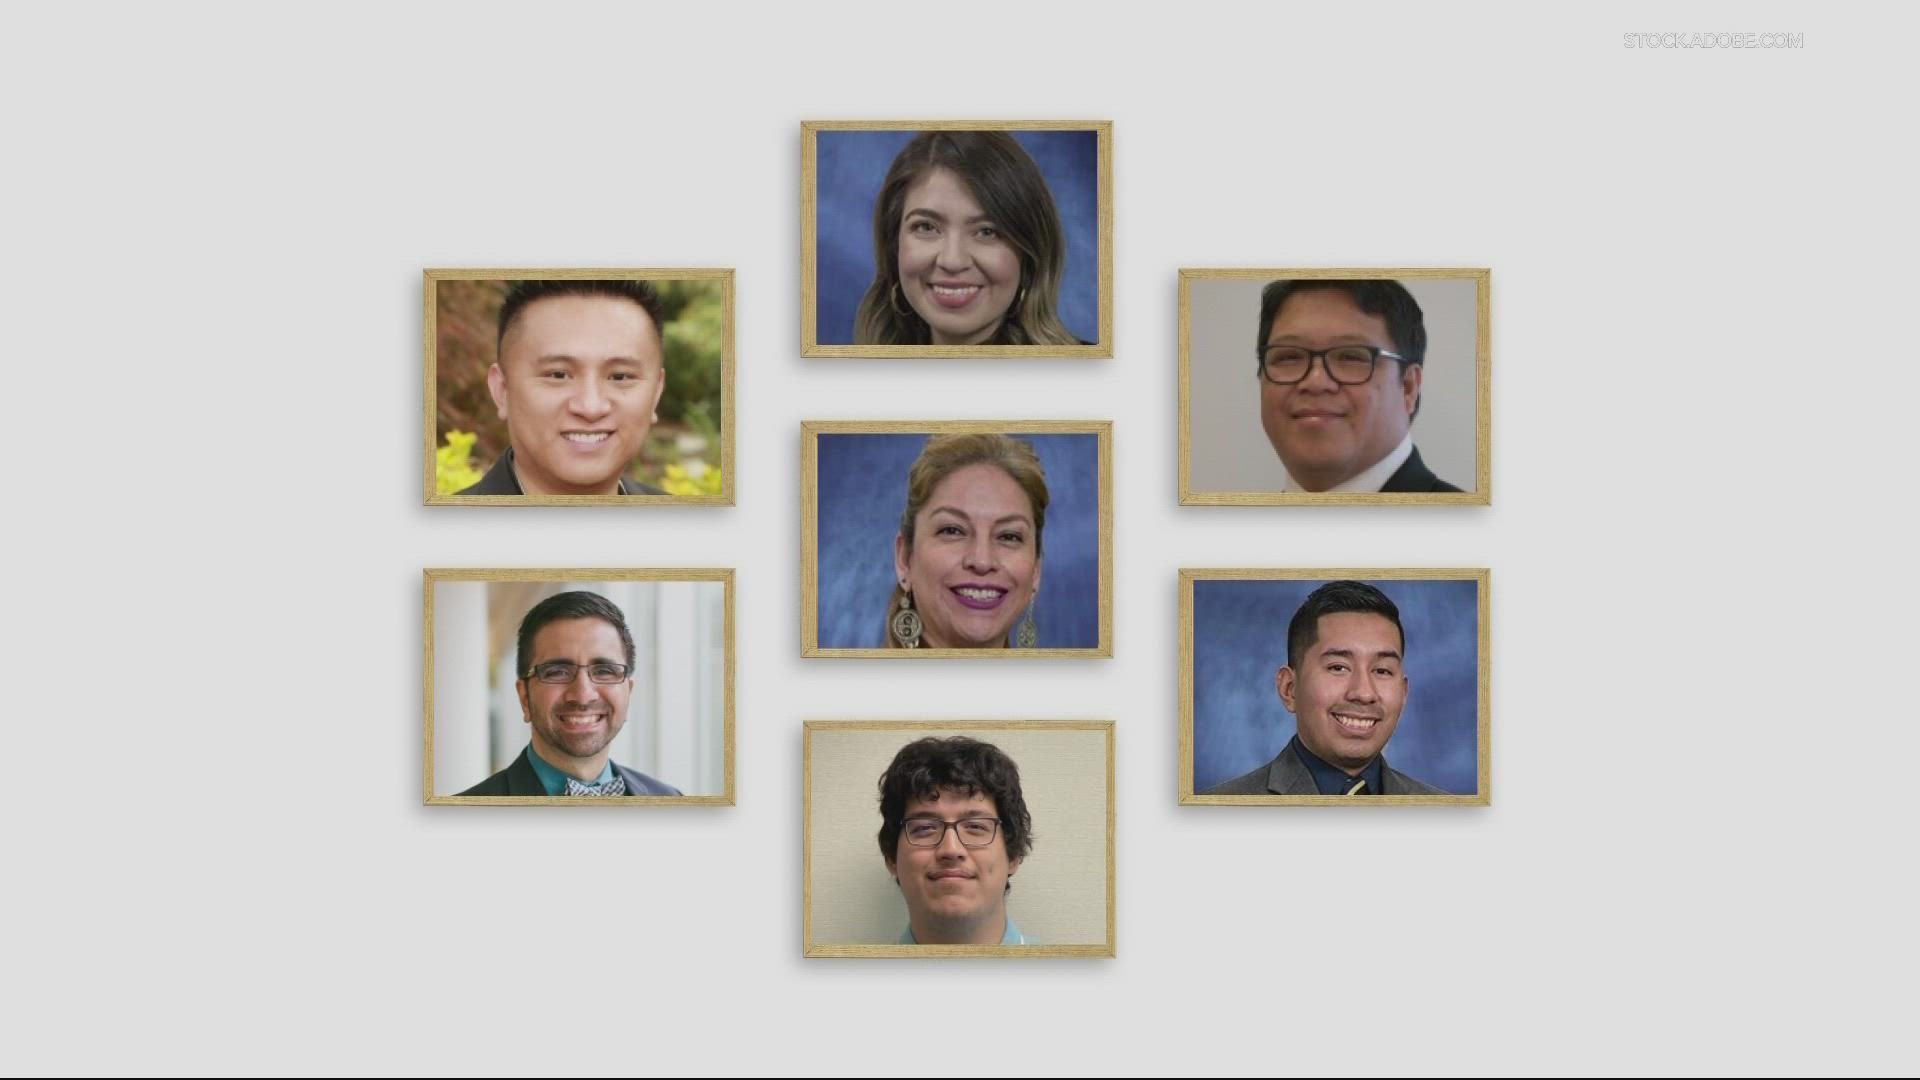 The Reynolds school board is made up entirely of people of color, which board members say is crucial in such a diverse district.